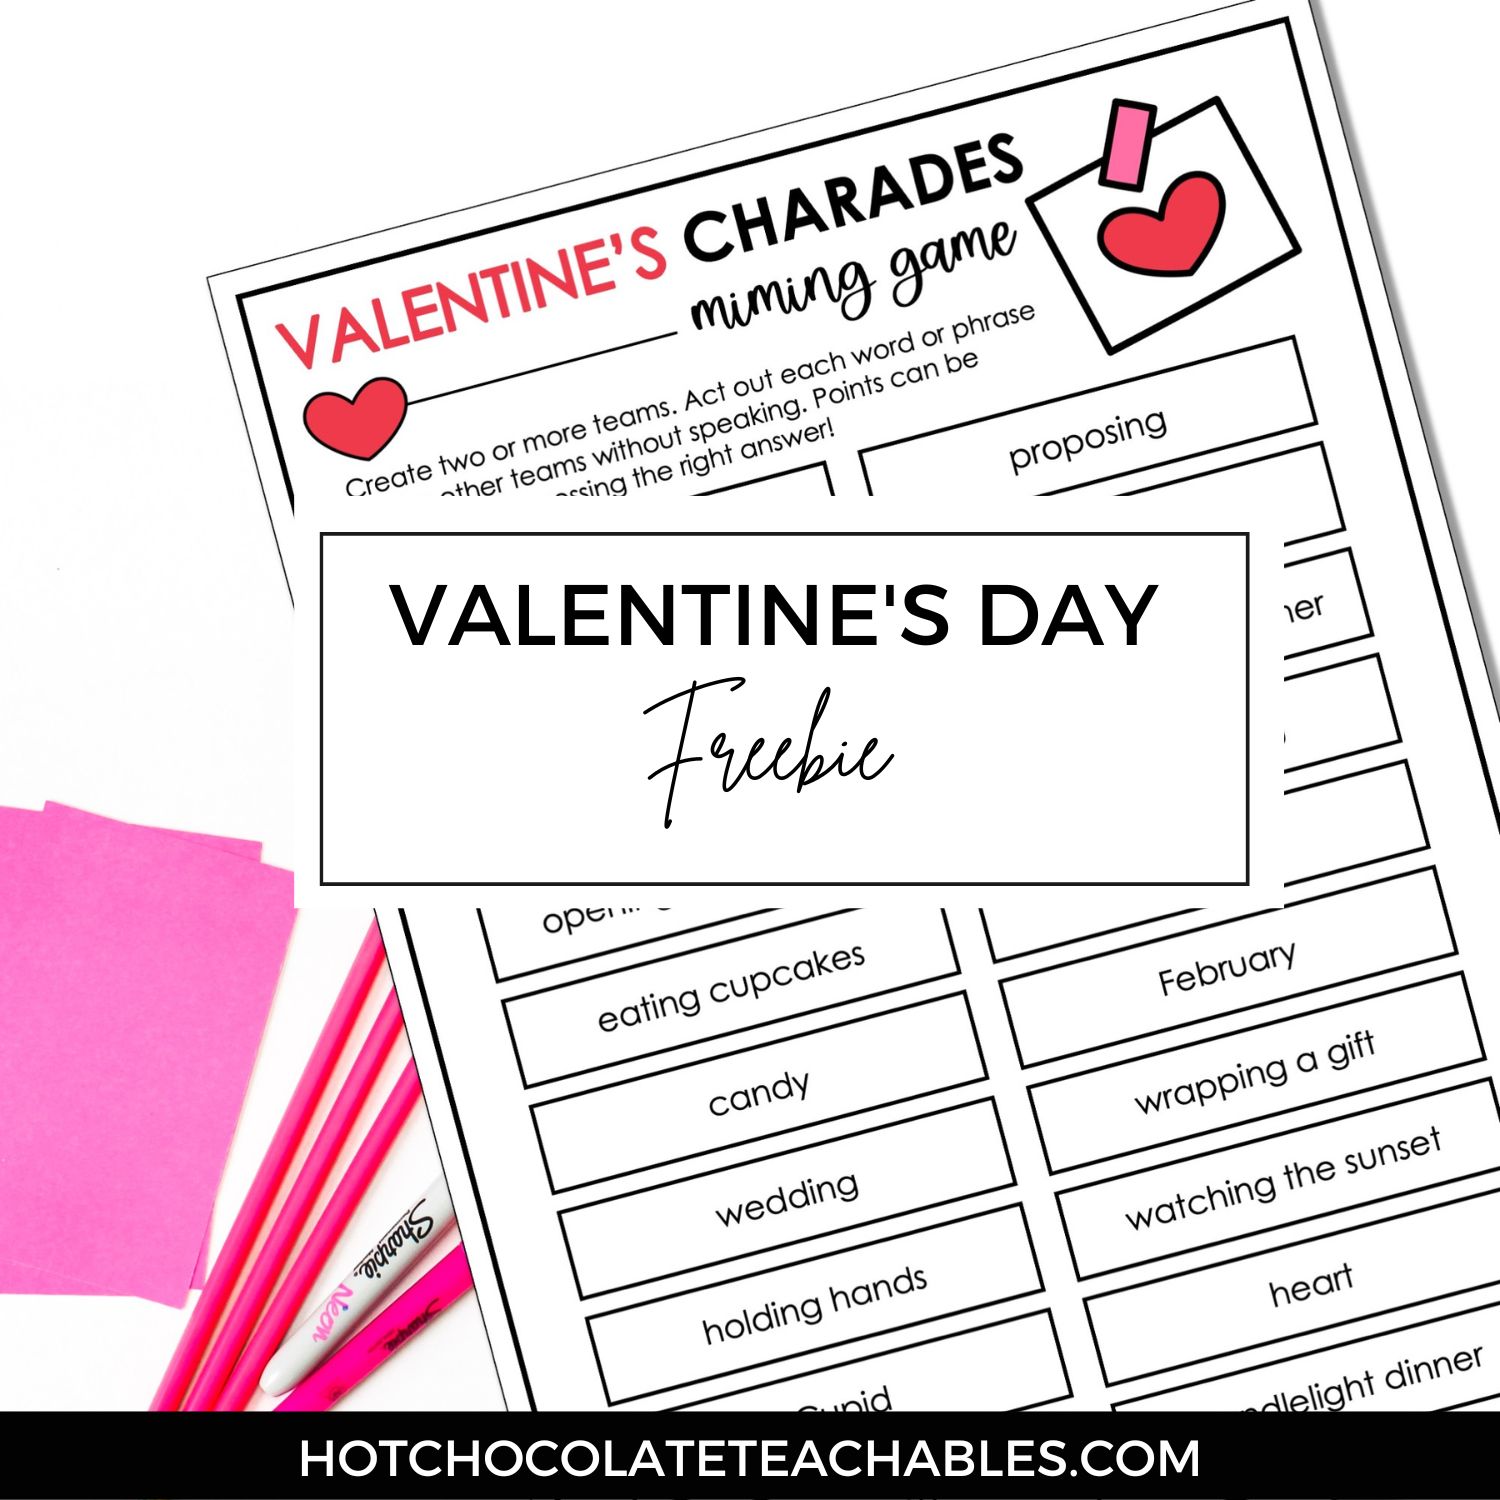 Valentine's Day Charades Party Game Freebie